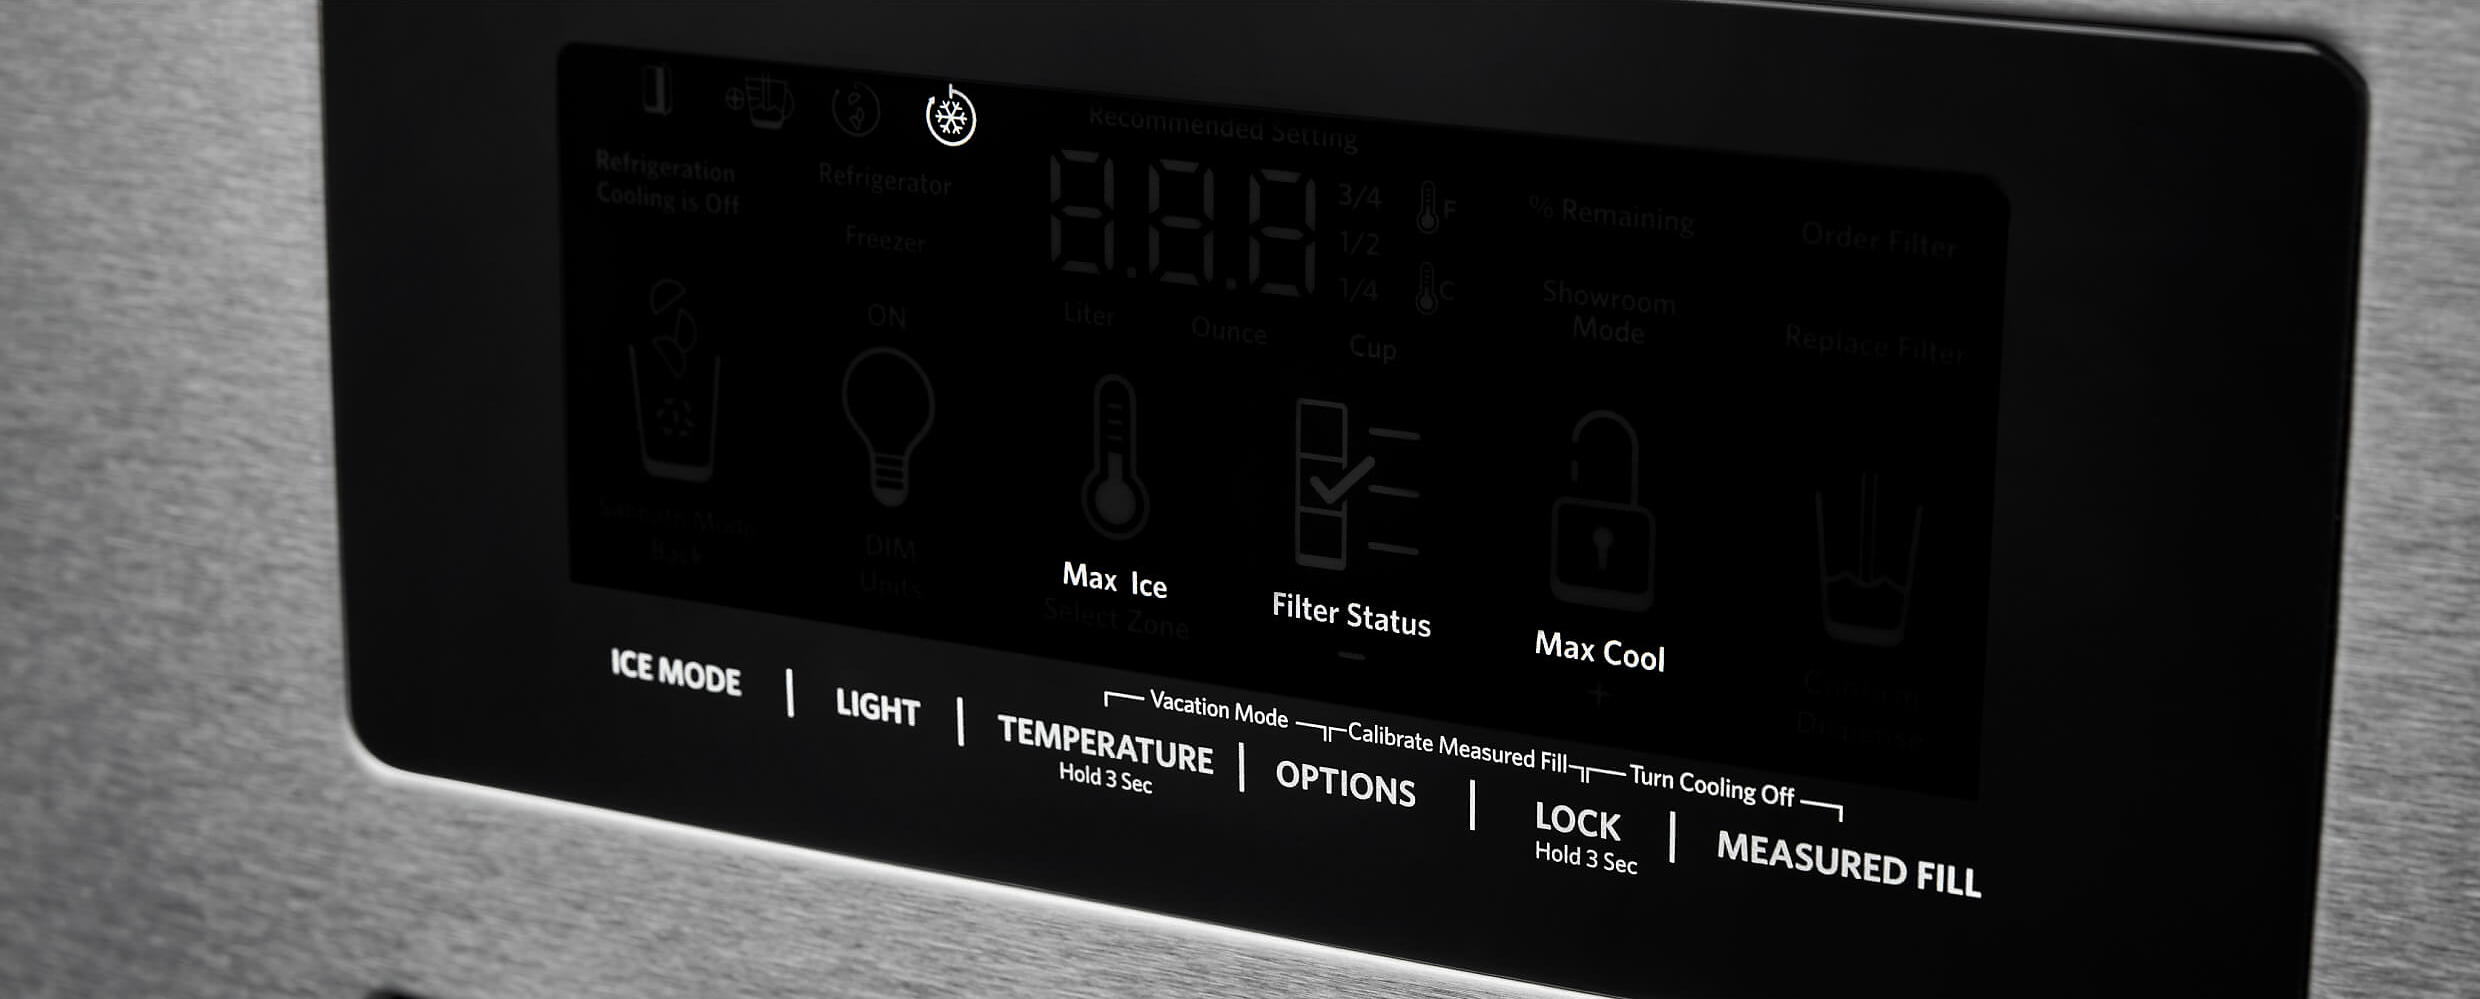 An illuminated Max Cool button on the KitchenAid® French Door Bottom Mount Refrigerator 